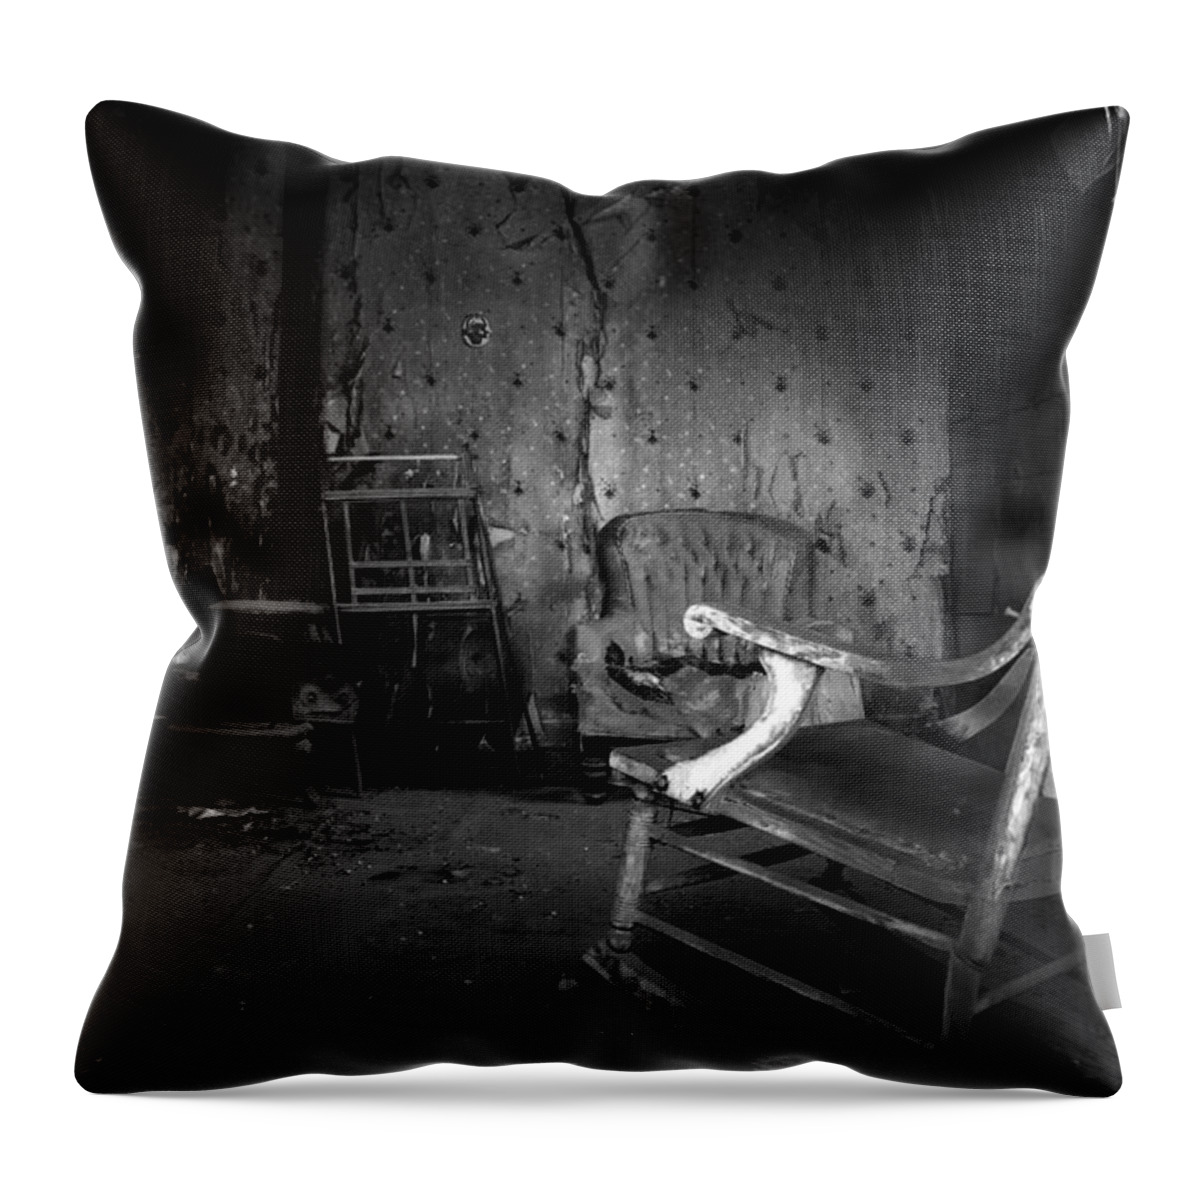 California Throw Pillow featuring the photograph Rocking Chair by Cat Connor